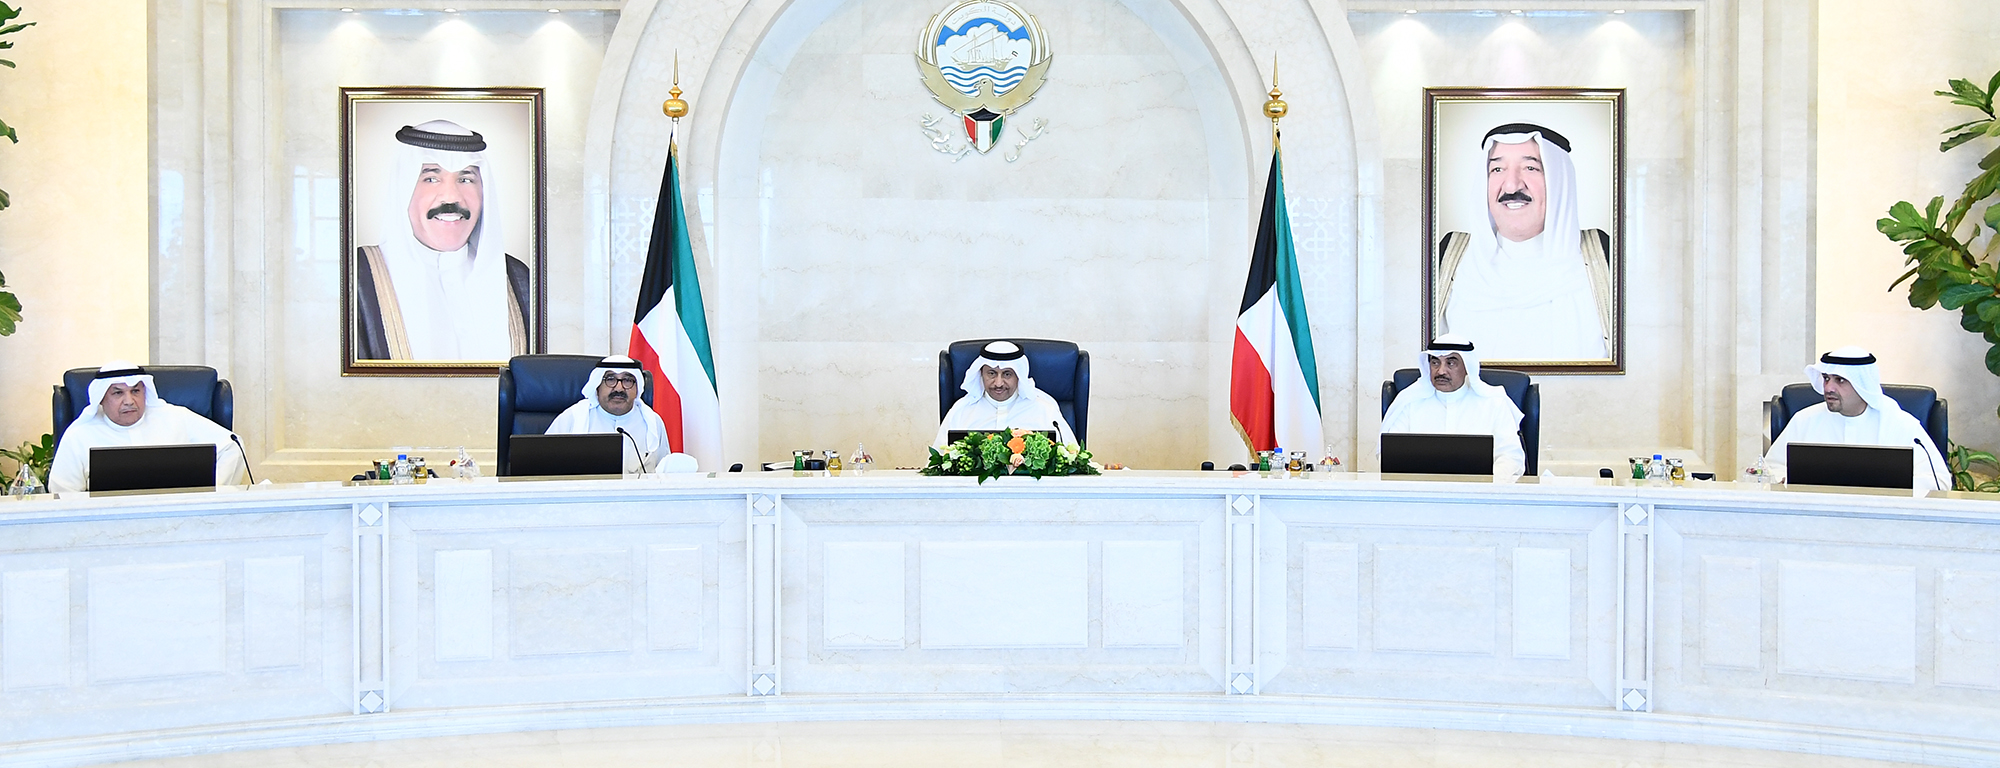 Kuwait's Cabinet weekly meeting